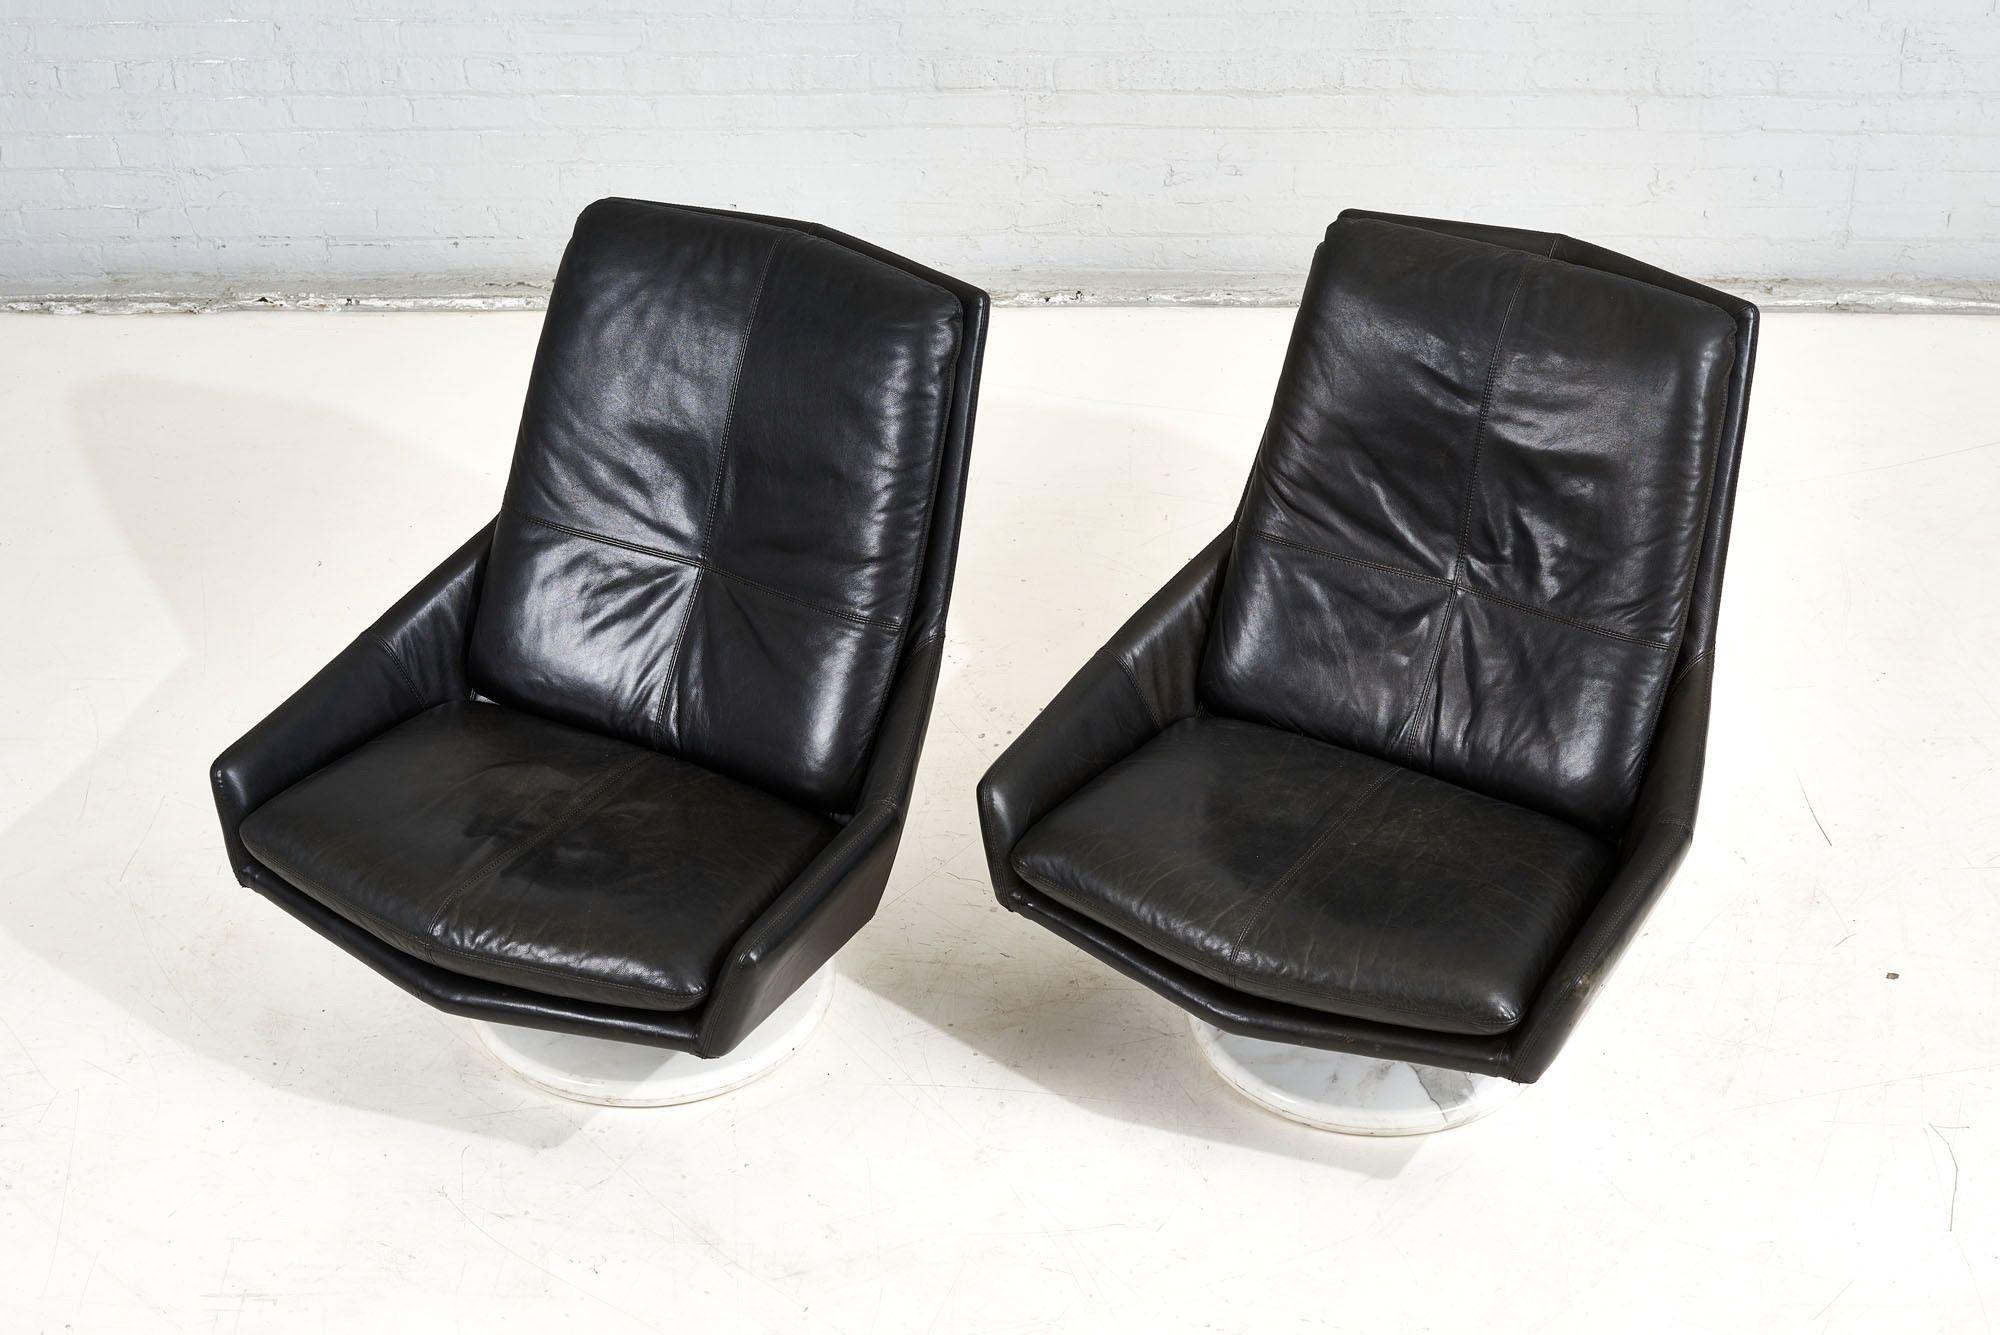 American Black Leather Lounge Chairs with Calacutta Marble Bases, 1970 For Sale